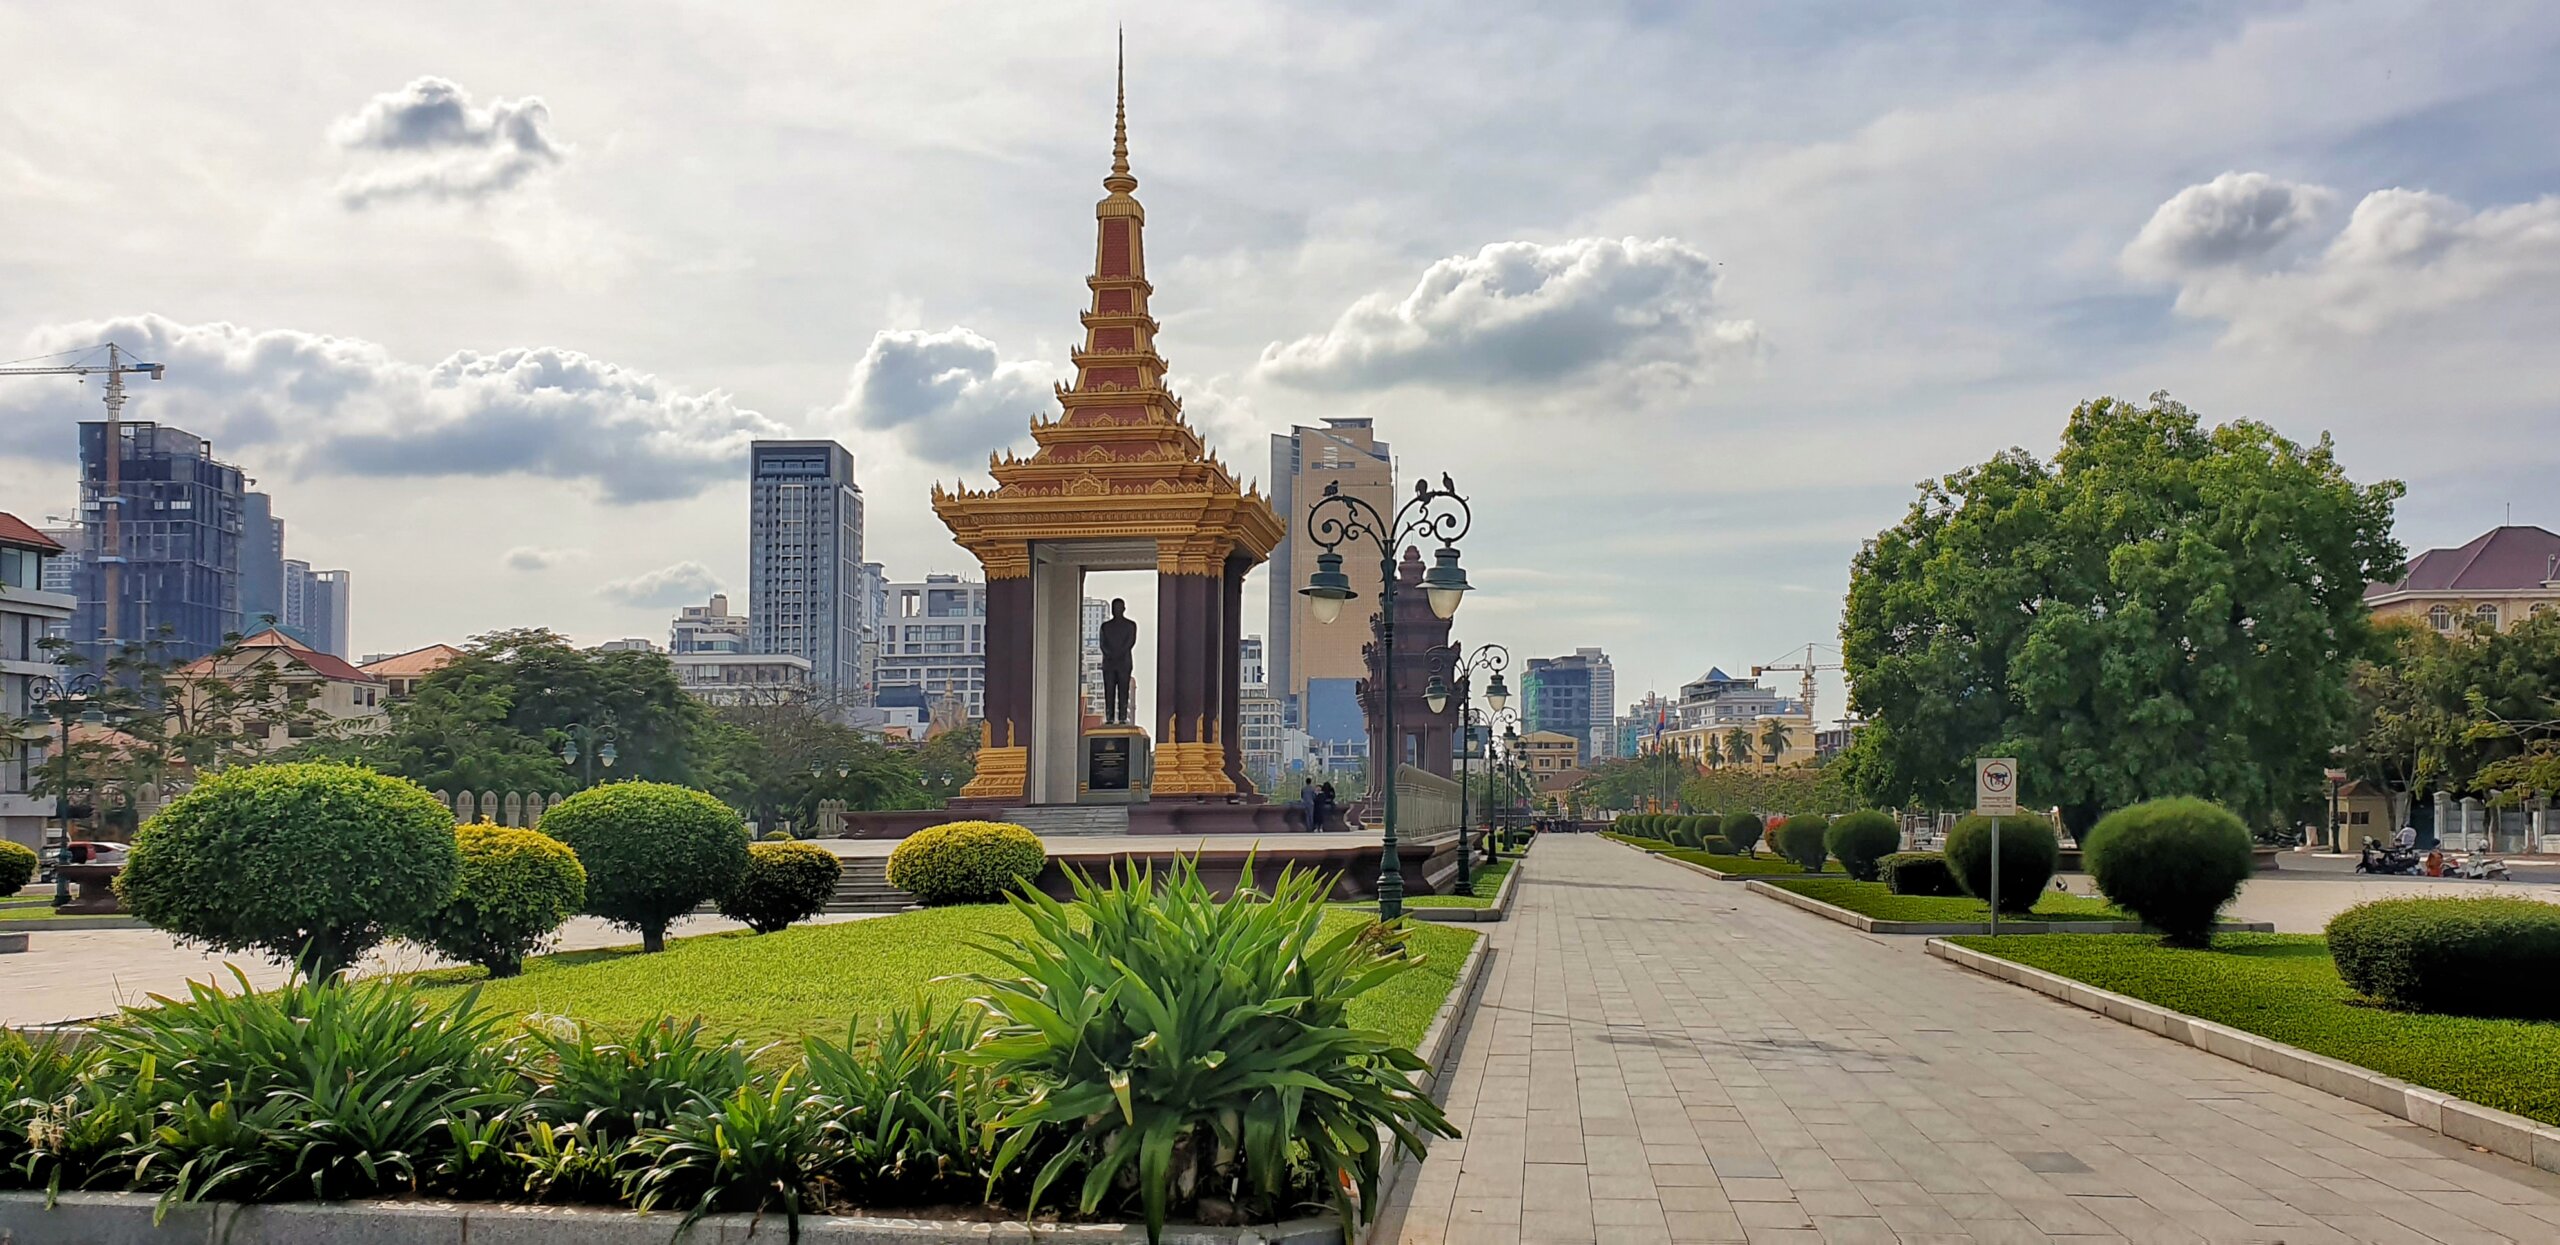 One day in Phnom Penh: 18 things to do